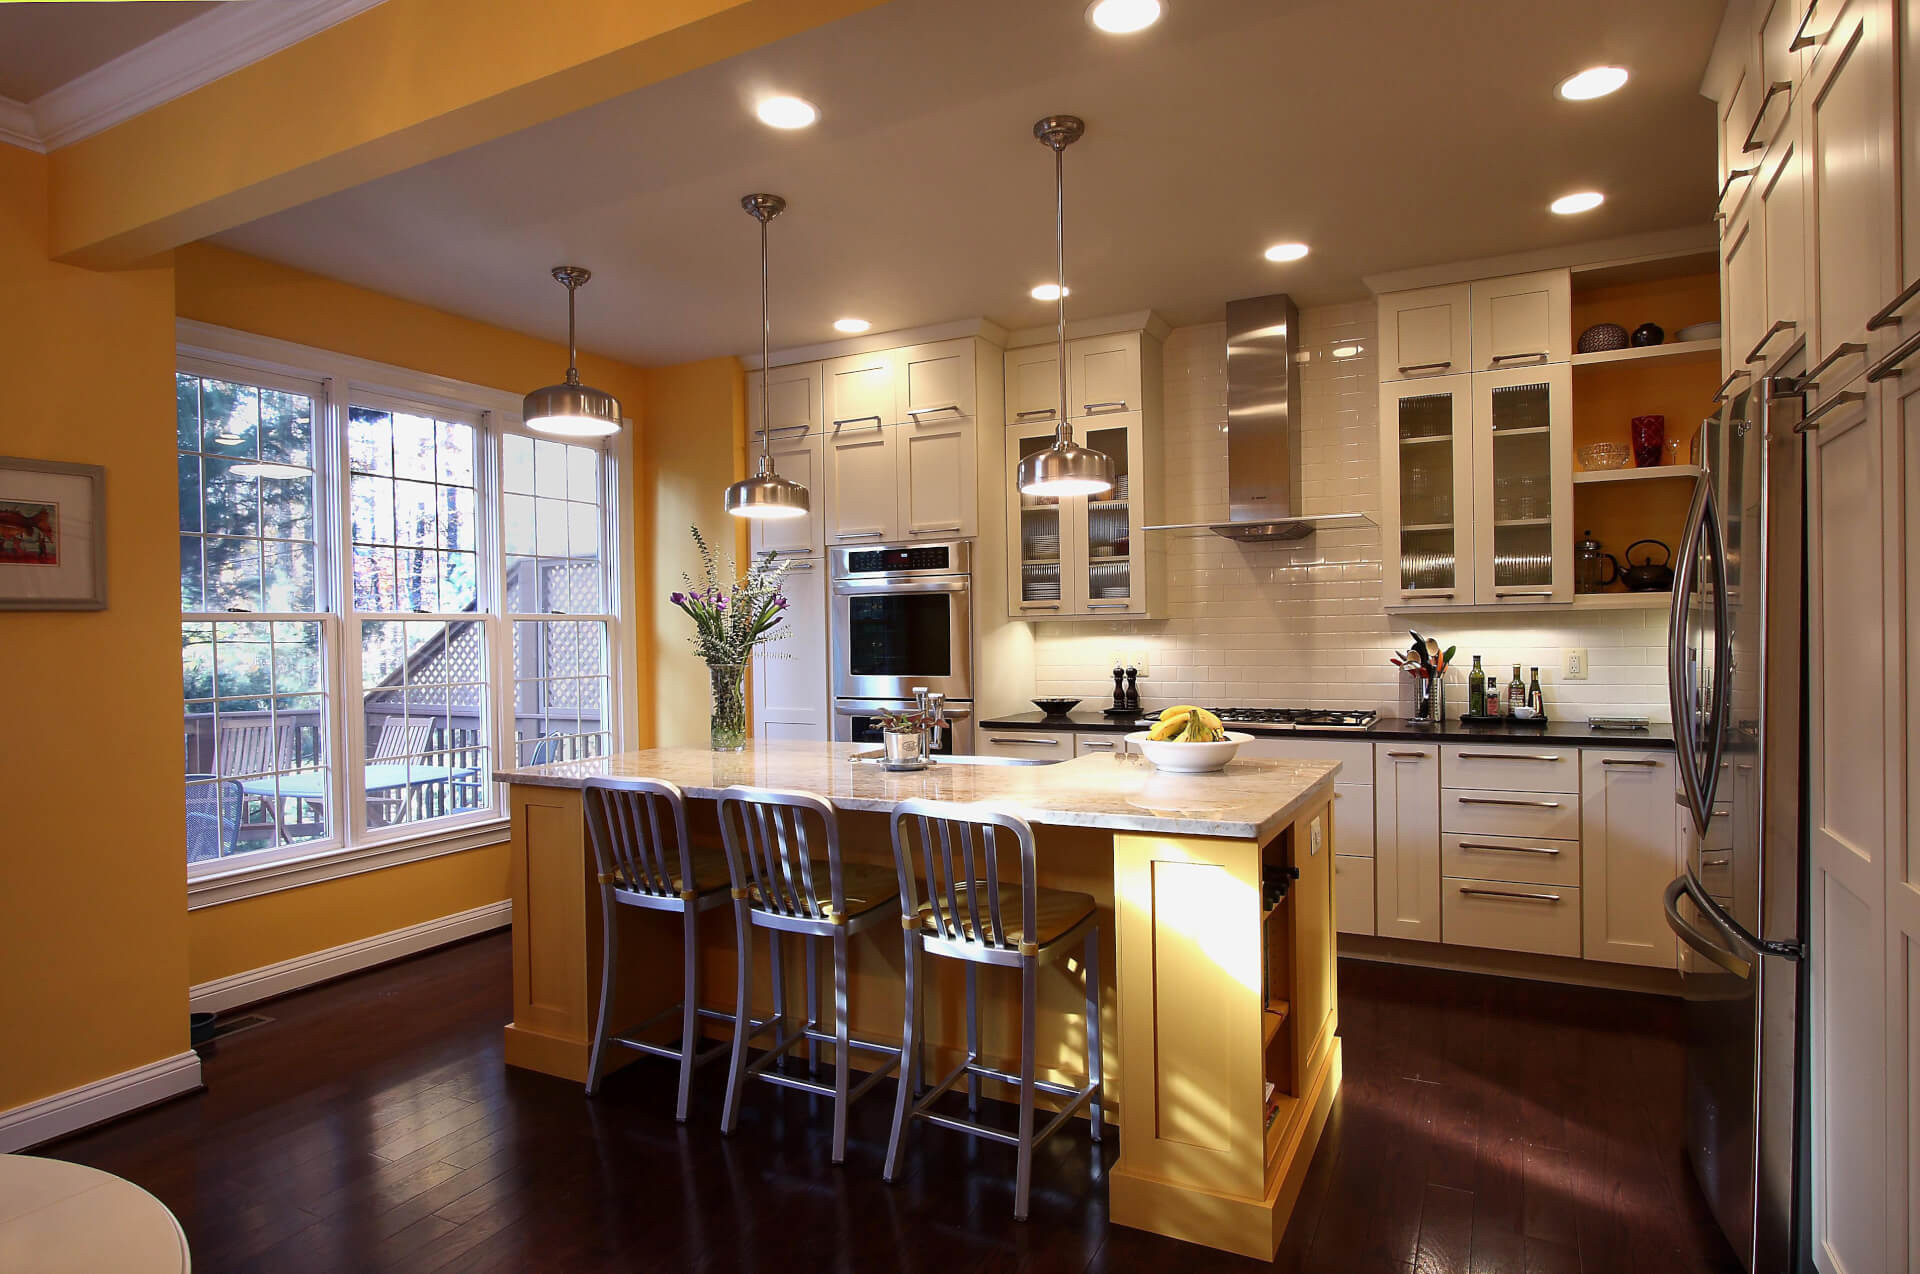 Small Kitchen Colors
 Kitchen Colors How to choose what colors to paint your